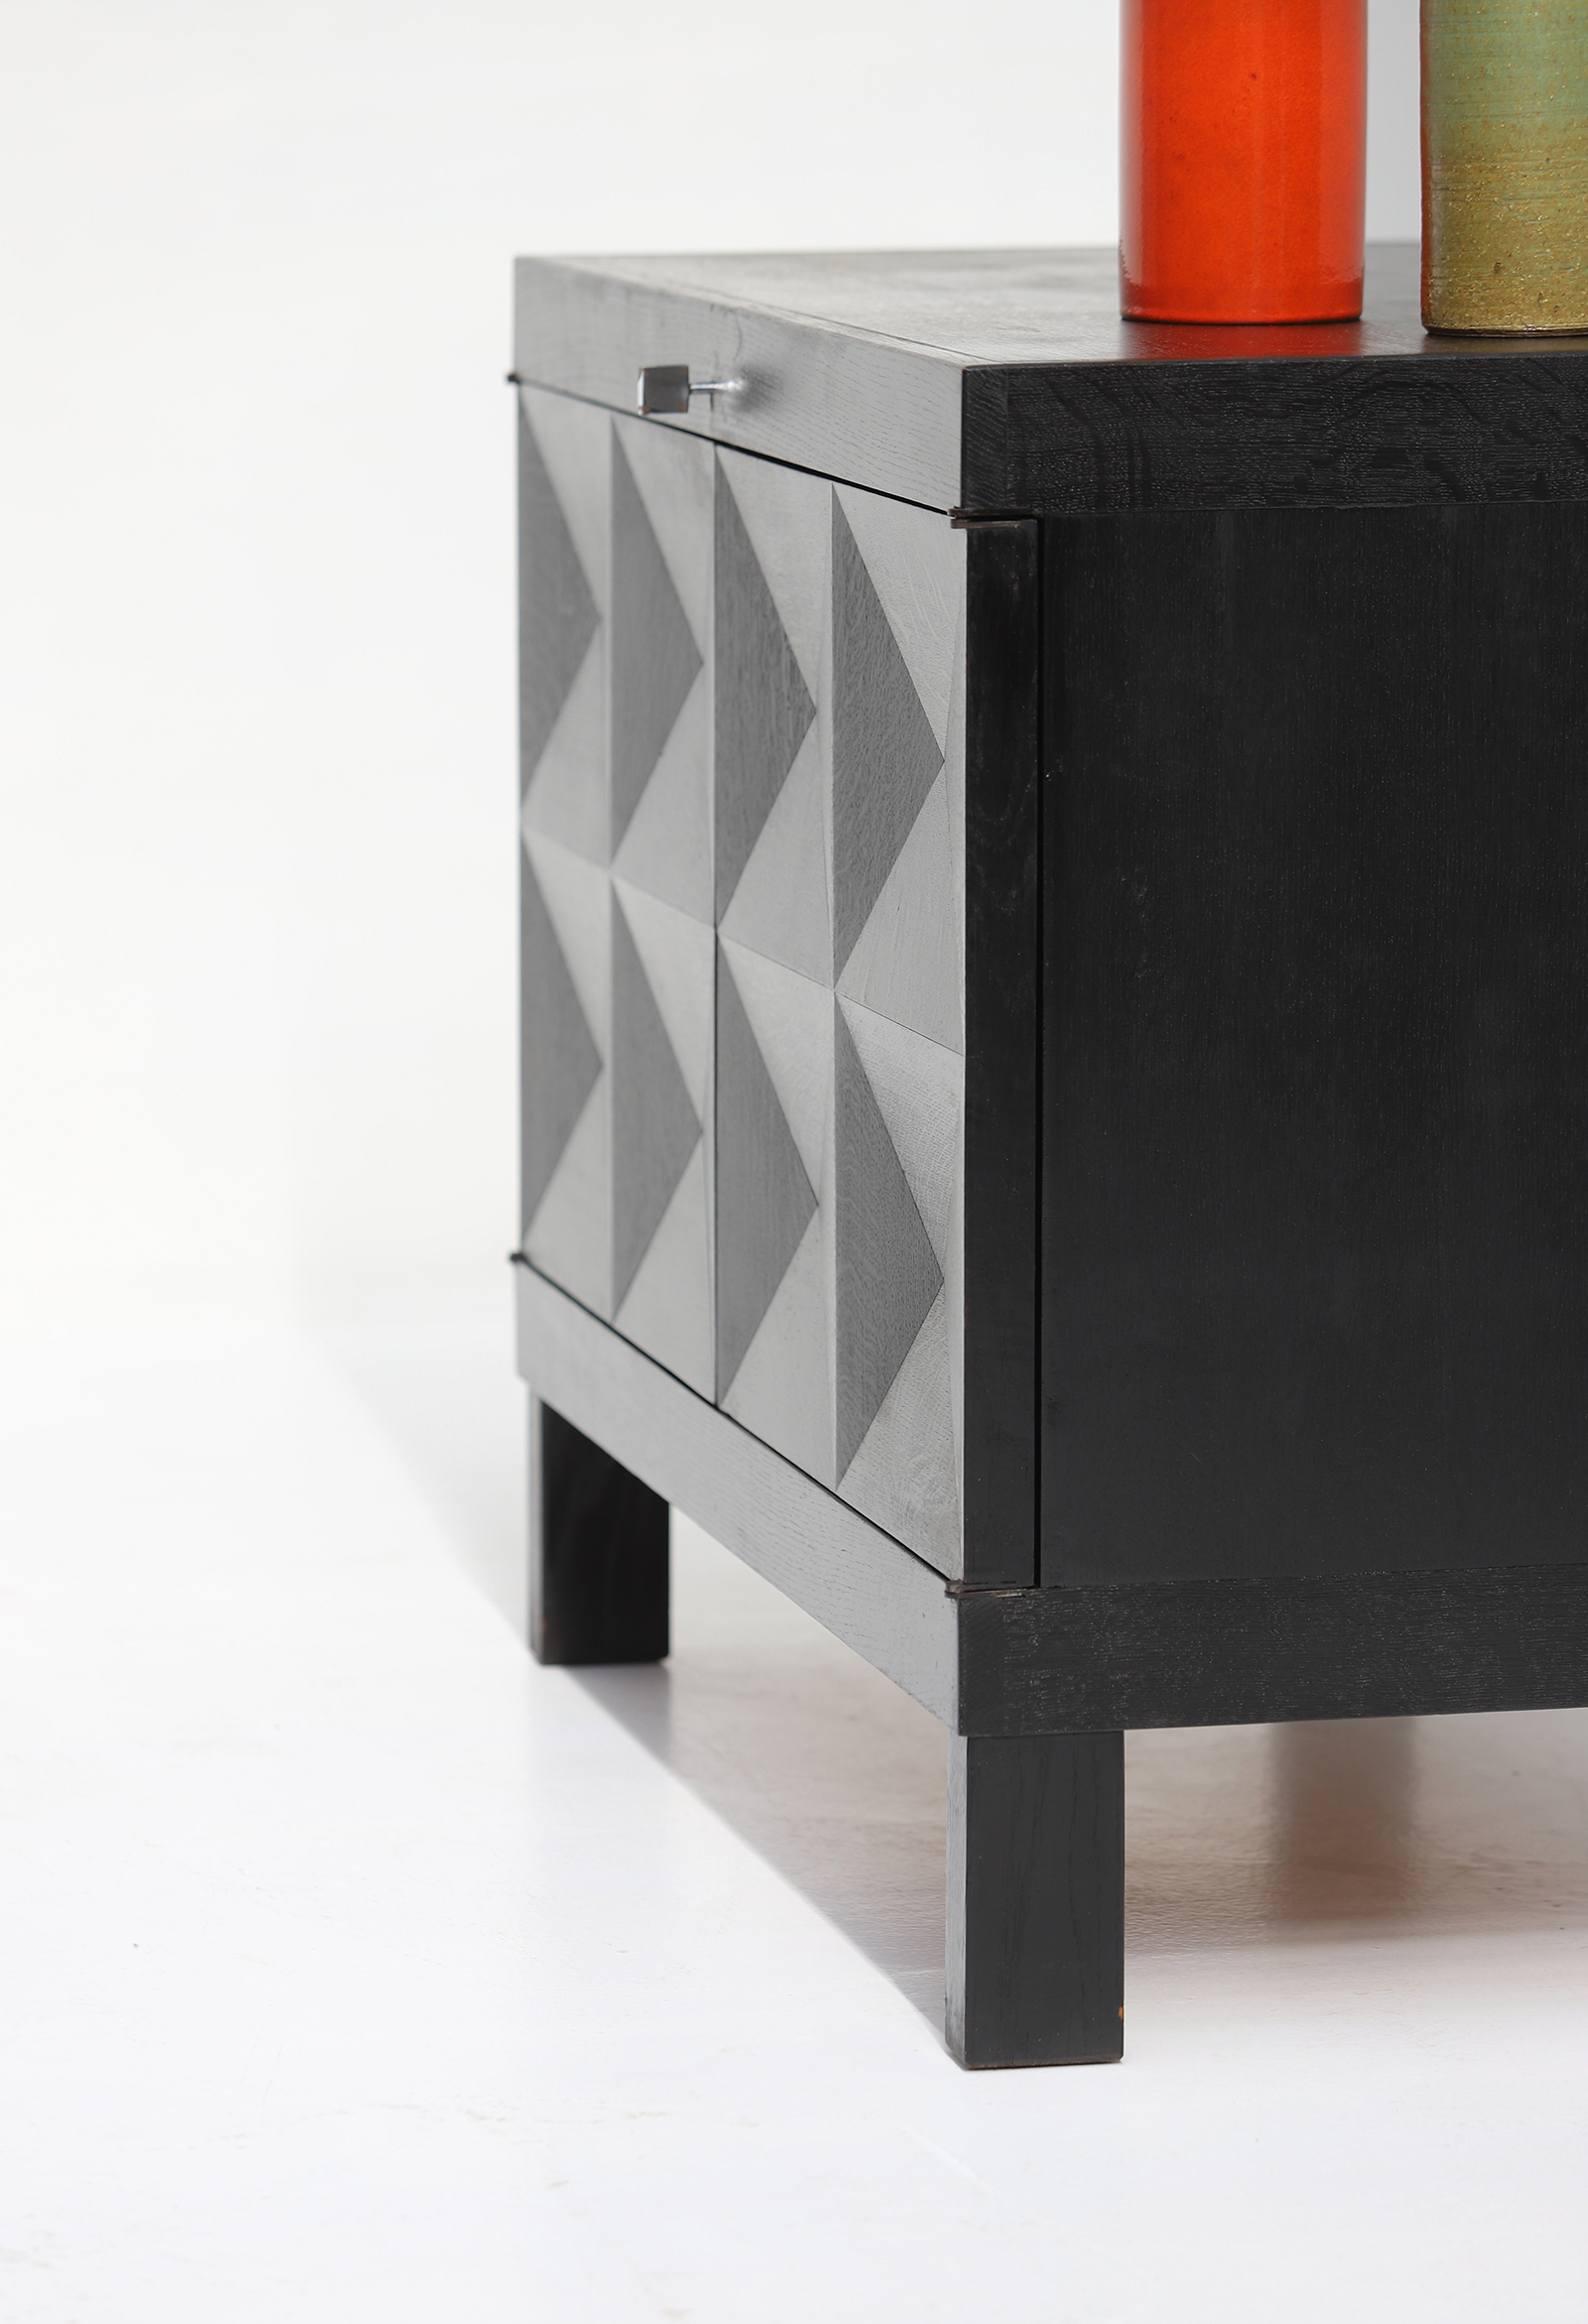 quality crafted cabinet with op-art doors designed by J. Batenburg for MI, Belgium 1969.image 7